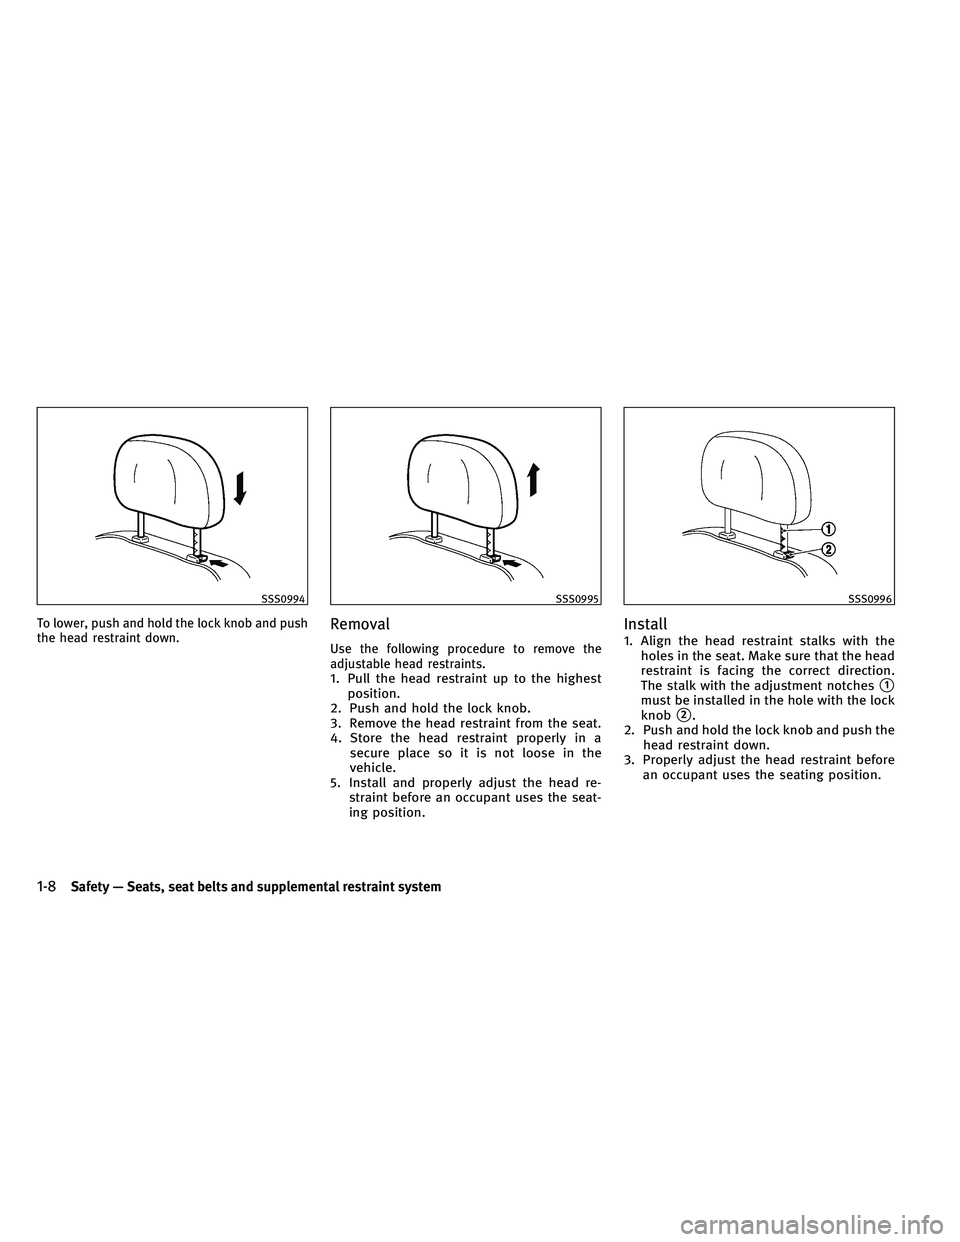 INFINITI EX 2011 Owners Manual To lower, push and hold the lock knob and push
the head restraint down.Removal
Use the following procedure to remove the
adjustable head restraints.
1. Pull the head restraint up to the highestpositio